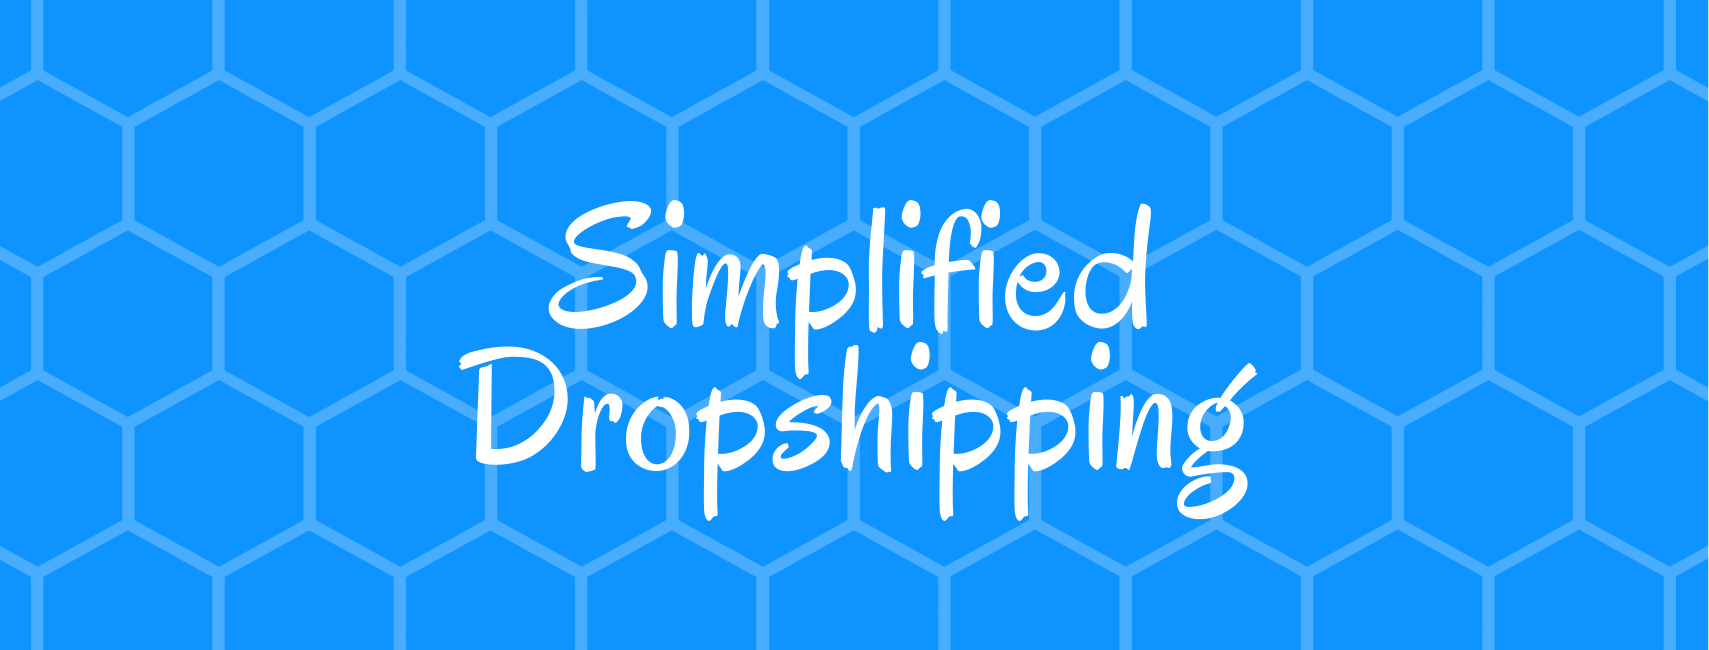 Simplified Shopify Dropshipping Simplified Dropshipping 4.0 Scott Hilse 